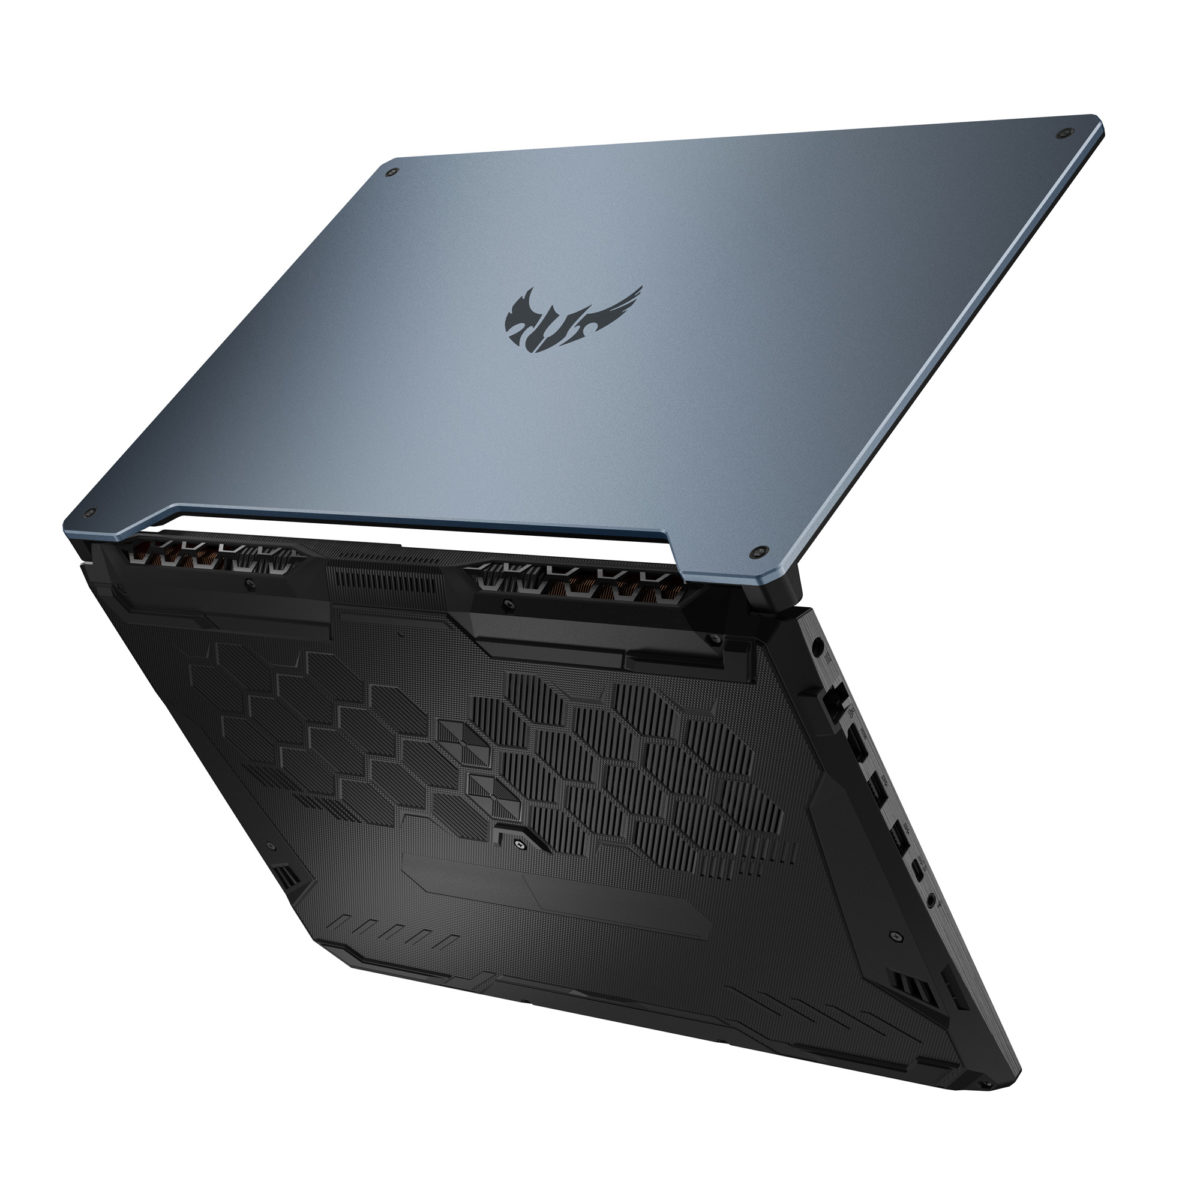 ASUS announces the new TUF Gaming laptops to reach the next level at CES 2020 |